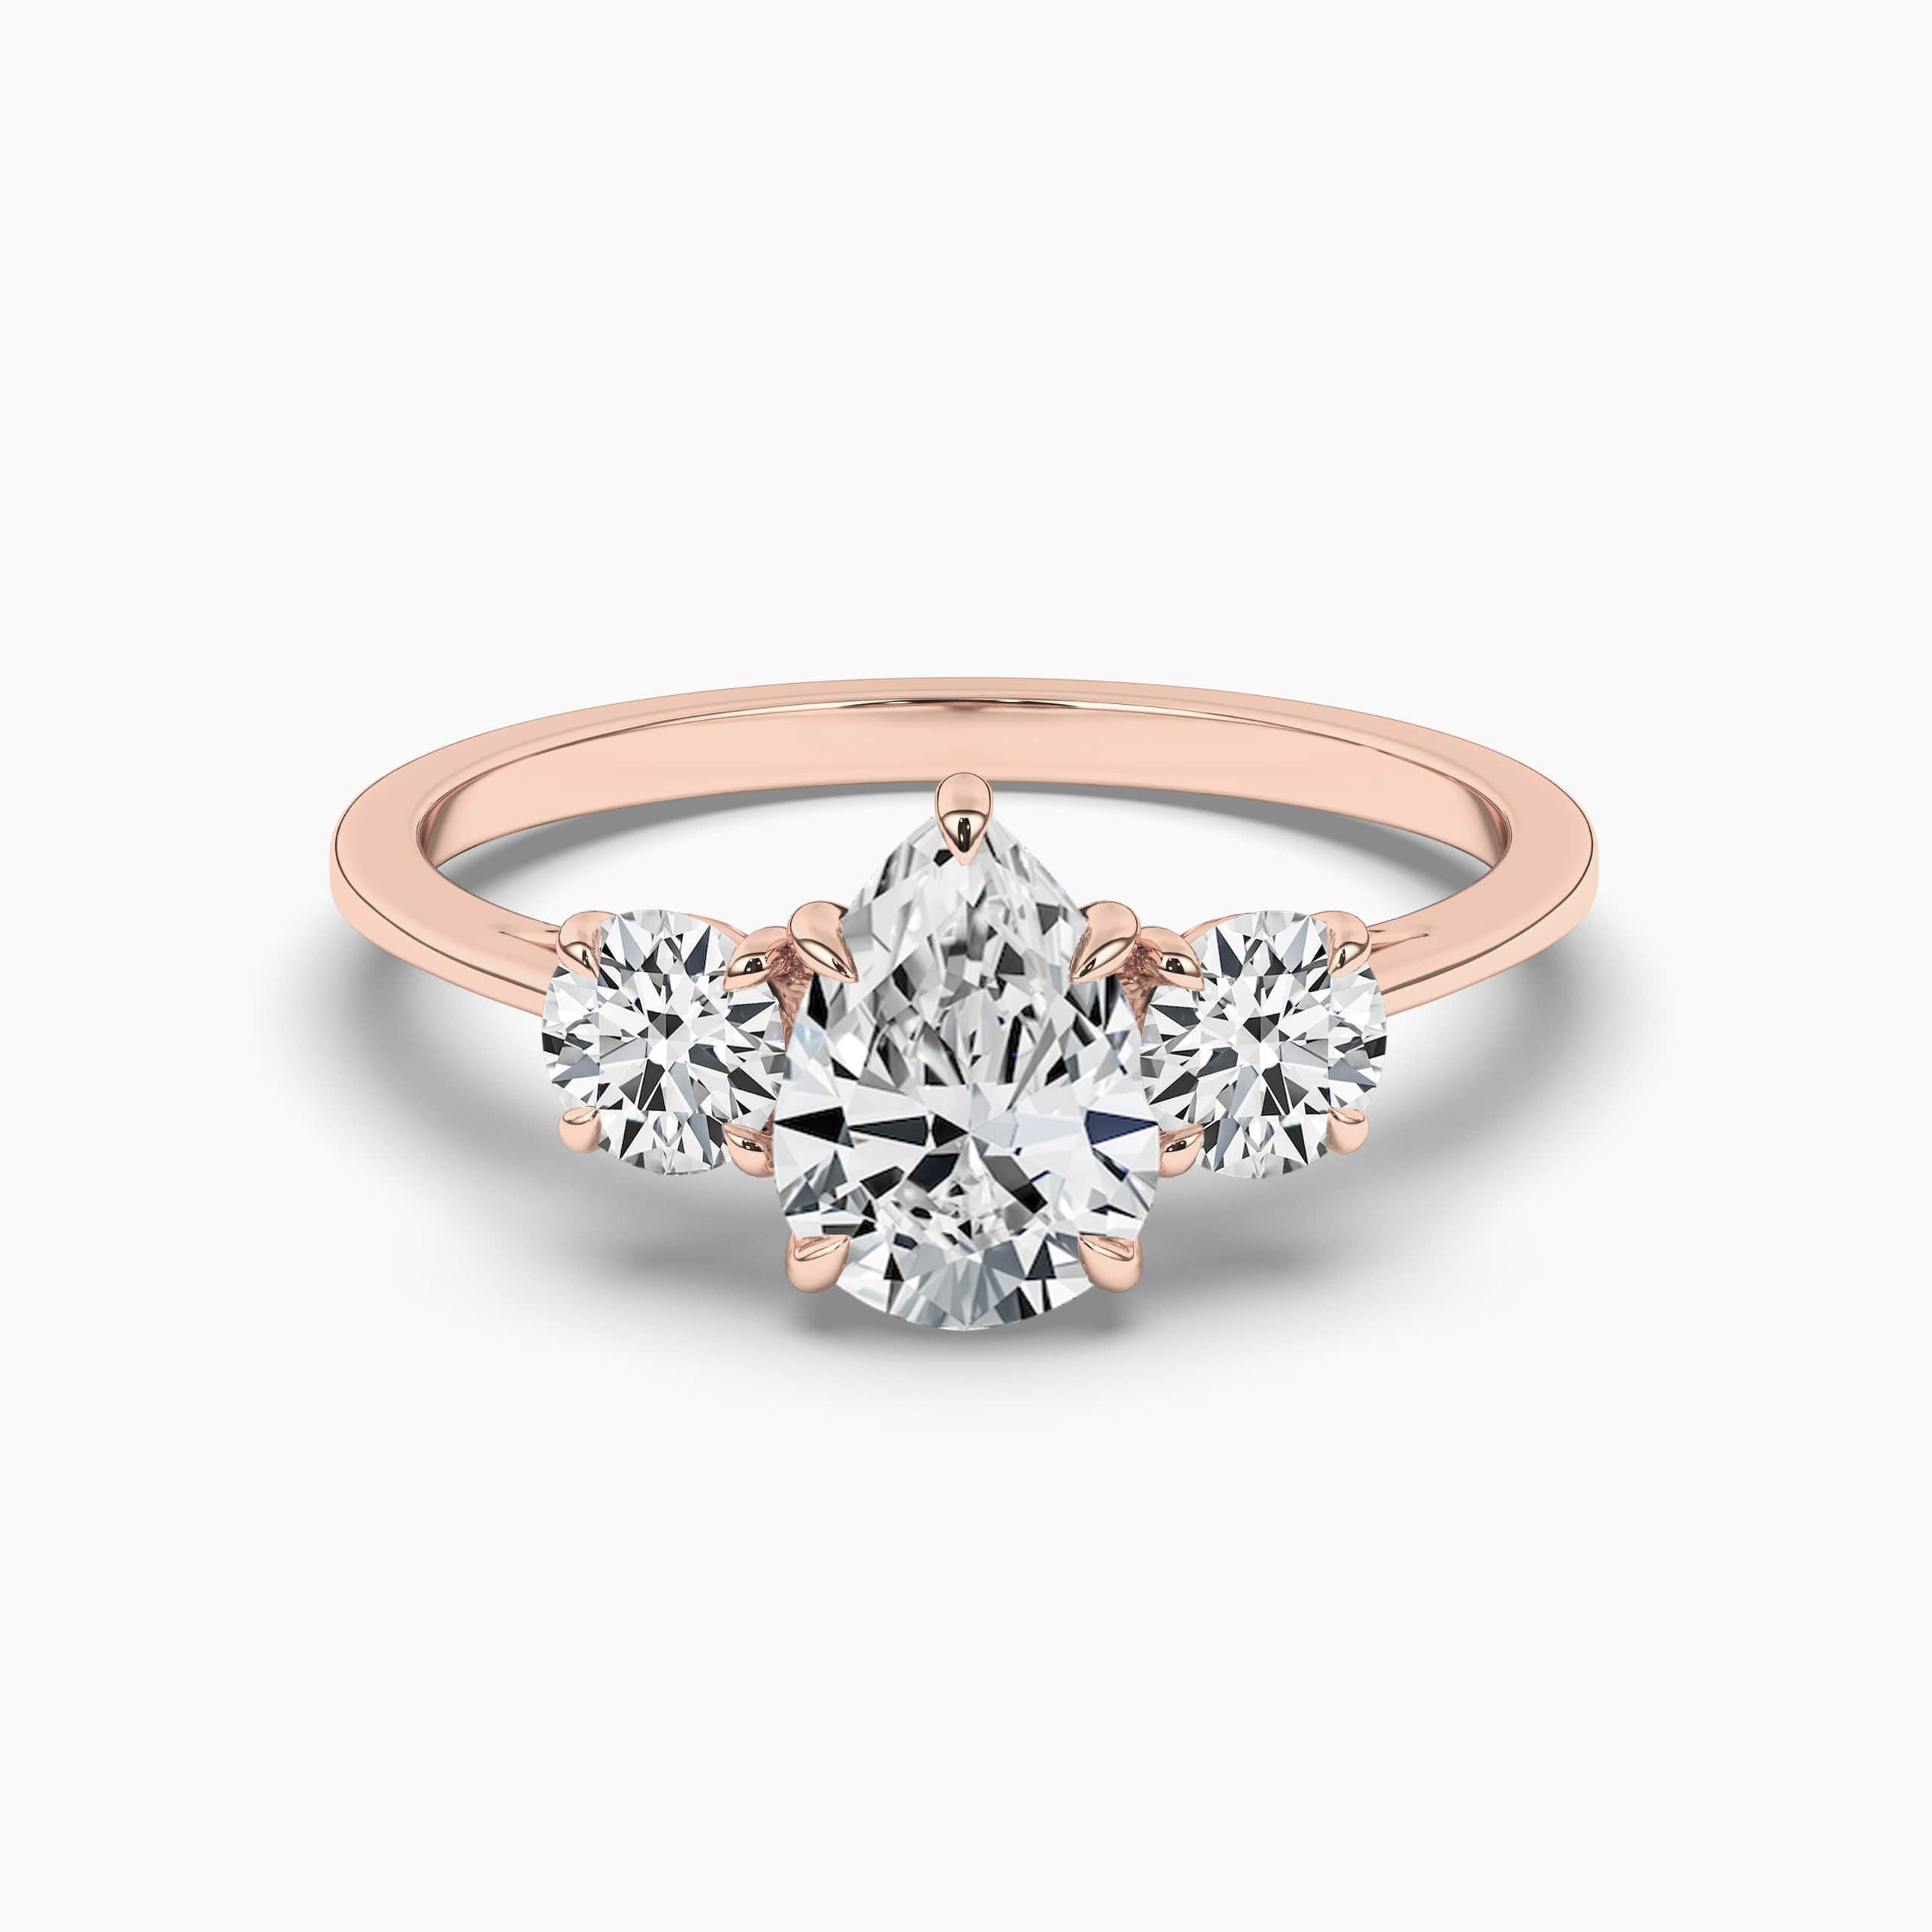 THREE-STONE ENGAGEMENT RING SET IN ROSE GOLD WITH PEAR CUT SIDE STONES